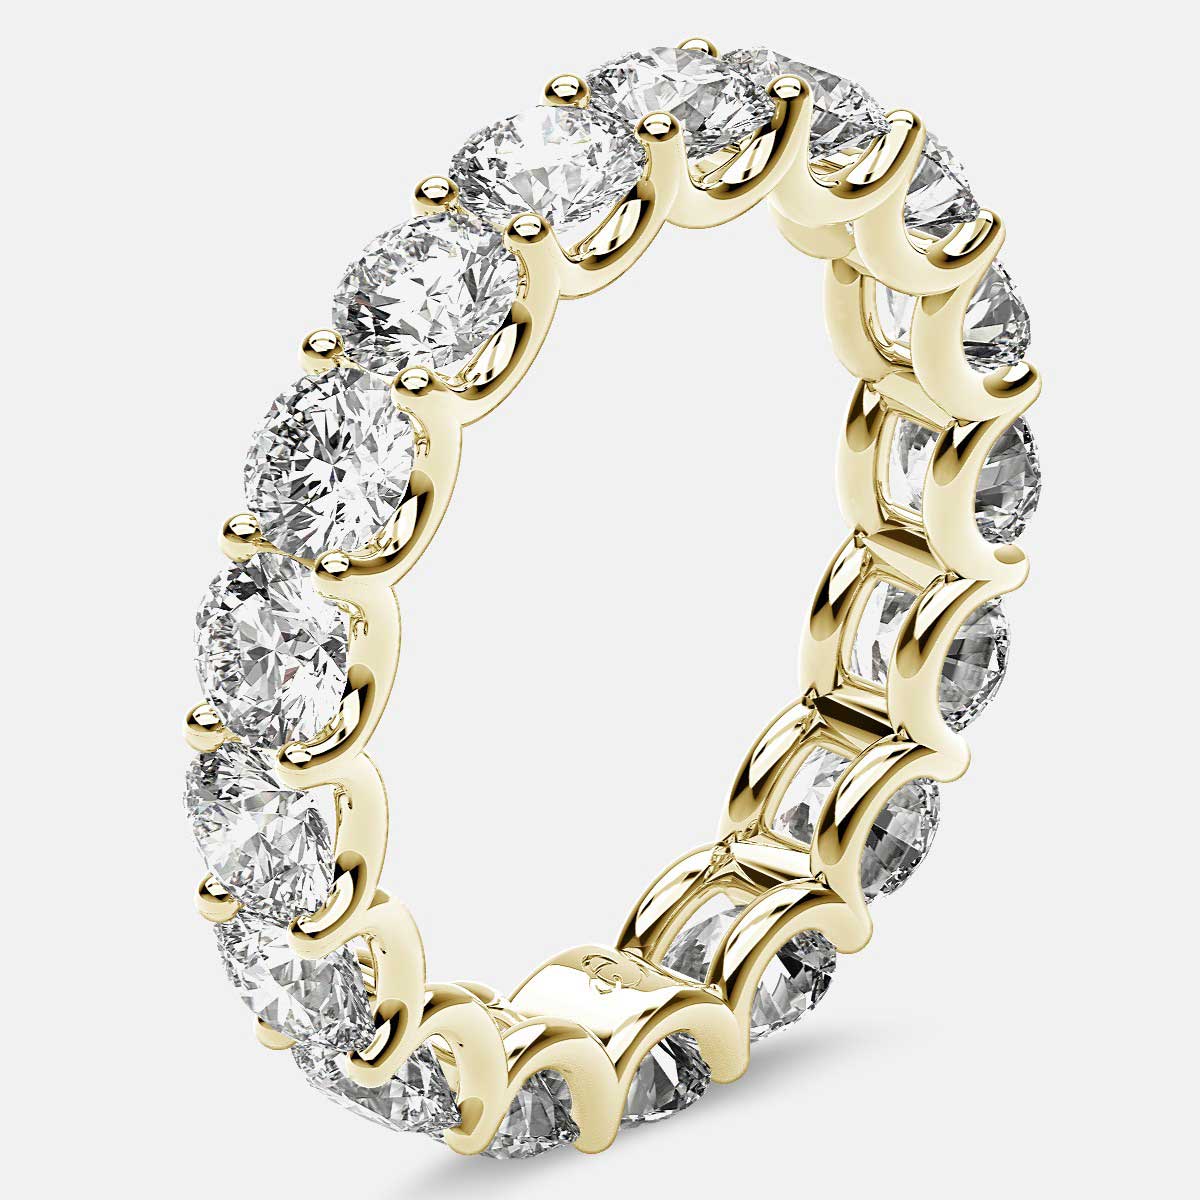 Eternity Ring with Arch Prong Set Round Diamonds in 18k Yellow Gold